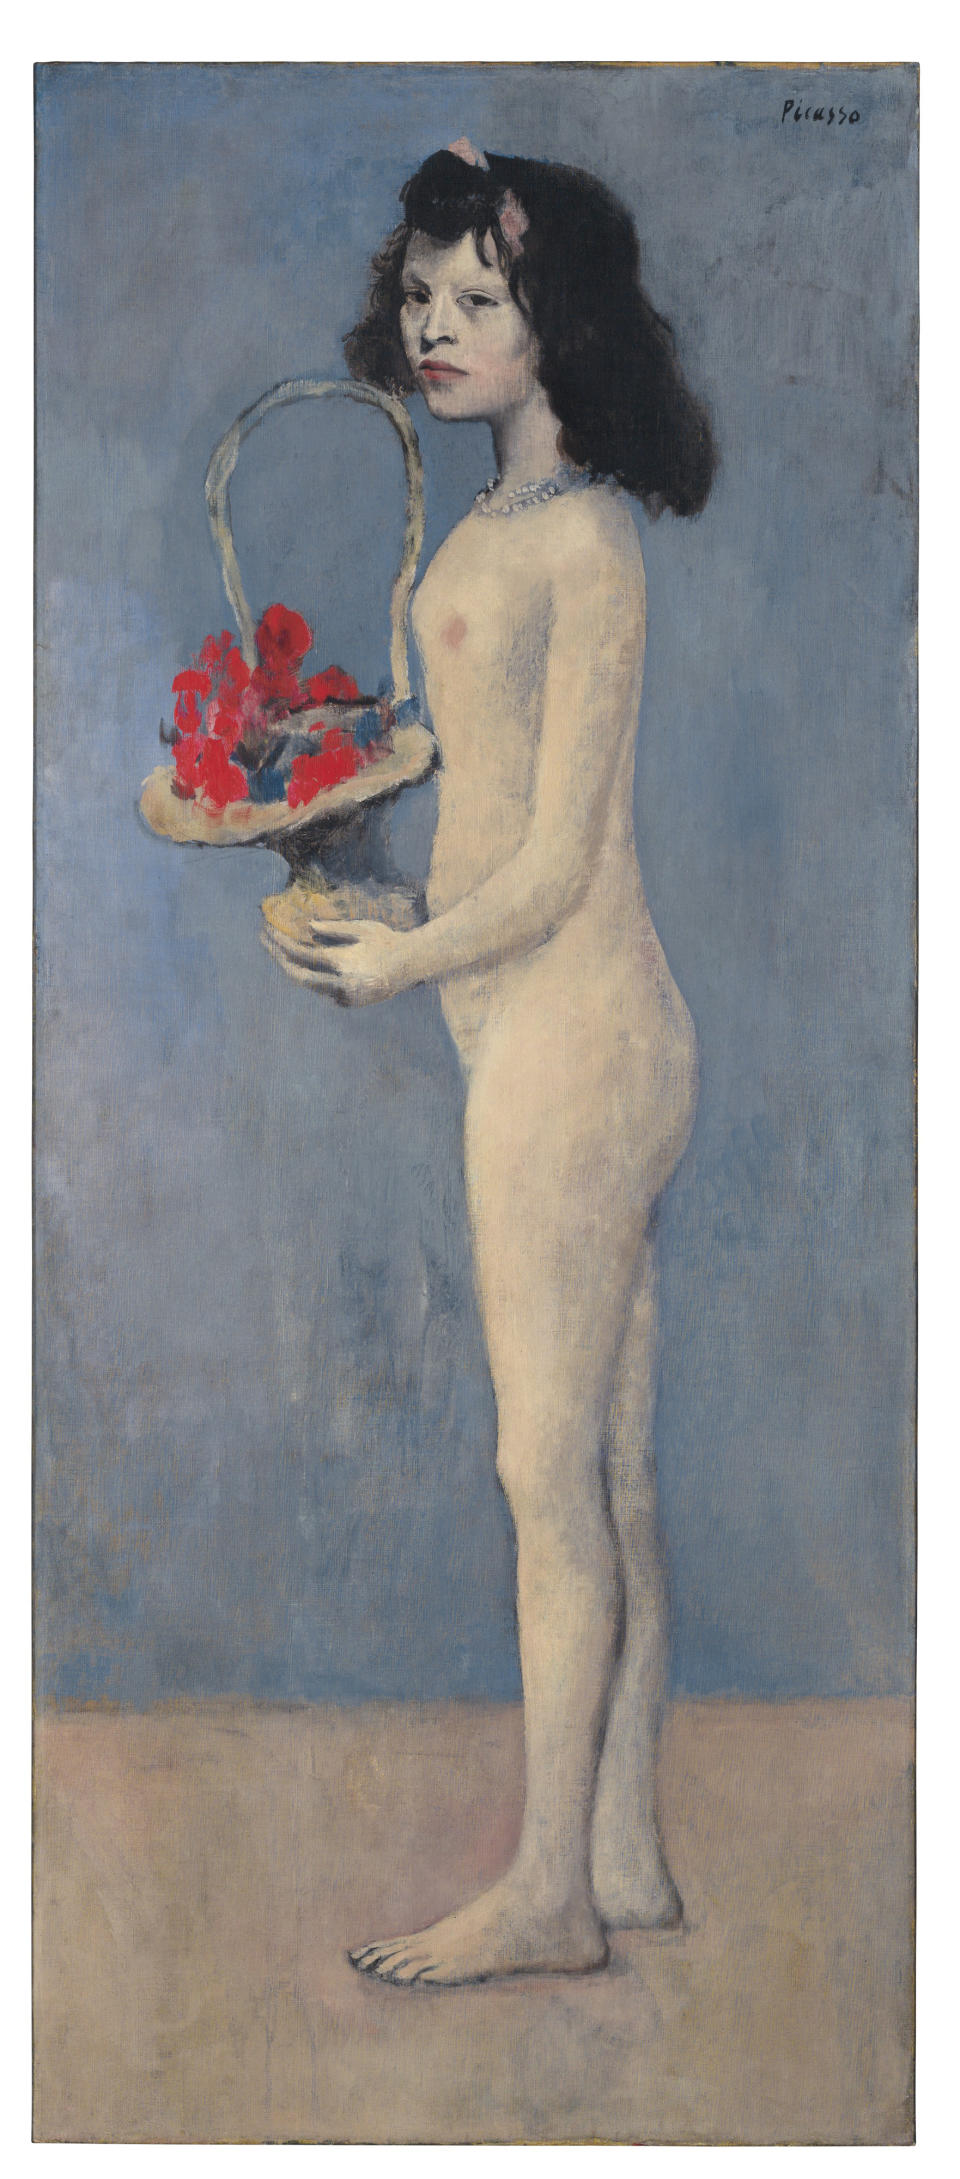 This photo provided by Christie's Images Ltd. 2018 shows Pablo Picasso's 1905 painting "Fillette a la corbeille fleurie, (Young Girl with a Flower Basket)." The painting, part of the collection of oil-family scion David Rockefeller and his wife Peggy, has an estimate of $90 million to $120 million and will be auctioned auctioned by Christie's Tuesday evening, May 8, 2018 in New York. Rockefeller, grandson of Standard Oil founder John D. Rockefeller, died in March at the age of 101. His family is selling the art collection to benefit cultural, educational, medical and environmental charities. (Christie's Images Ltd. 2018 via AP)